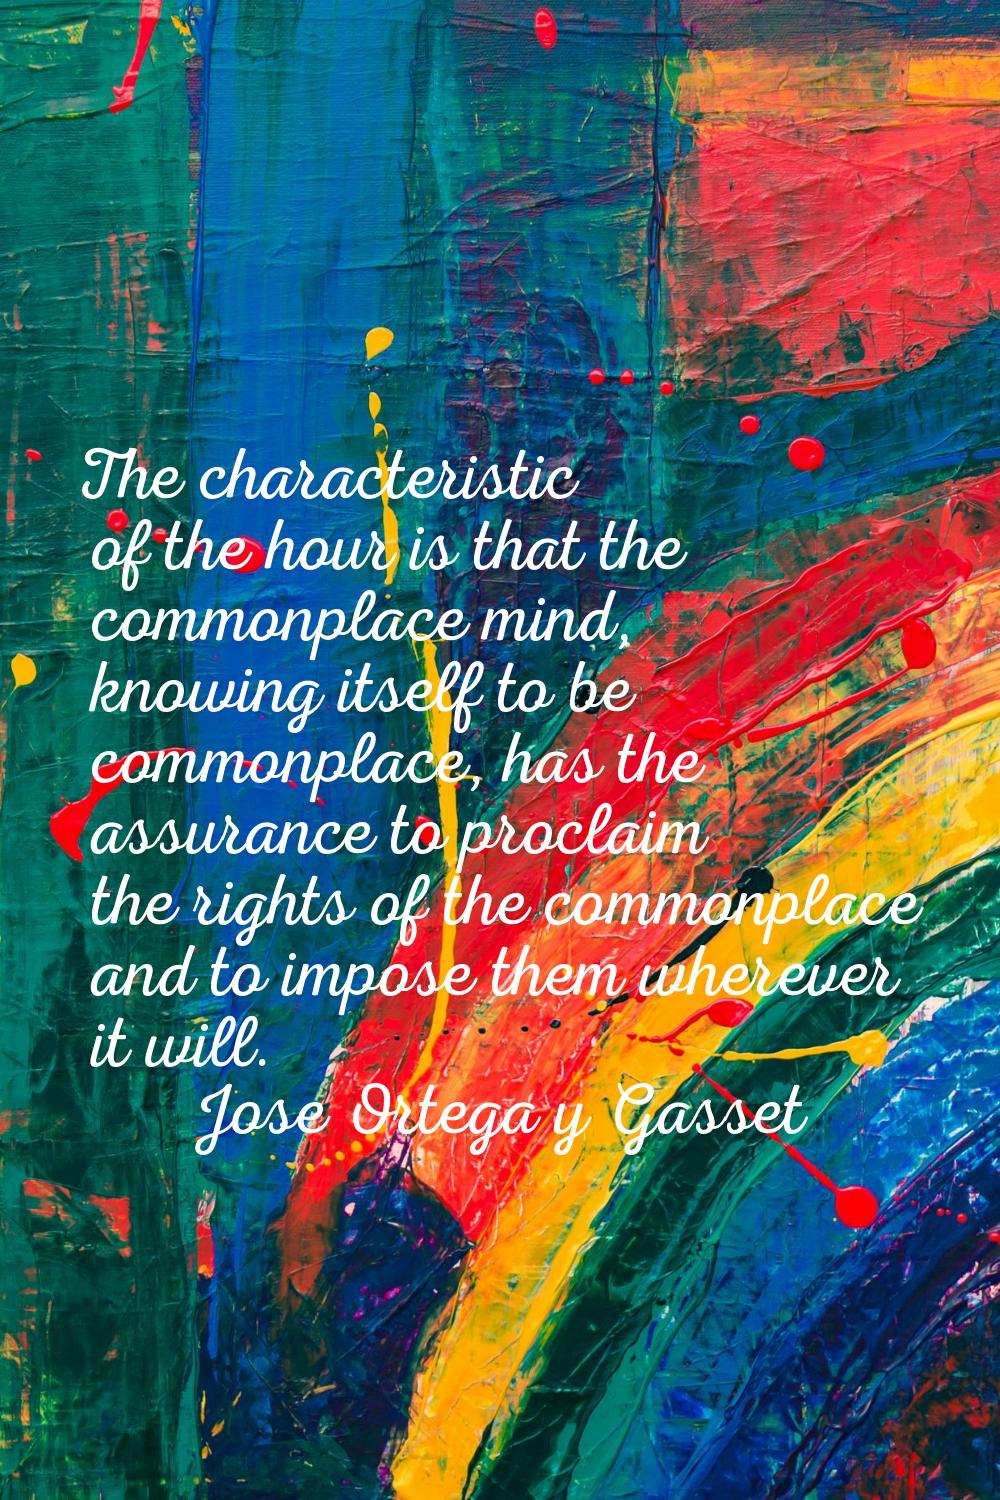 The characteristic of the hour is that the commonplace mind, knowing itself to be commonplace, has 